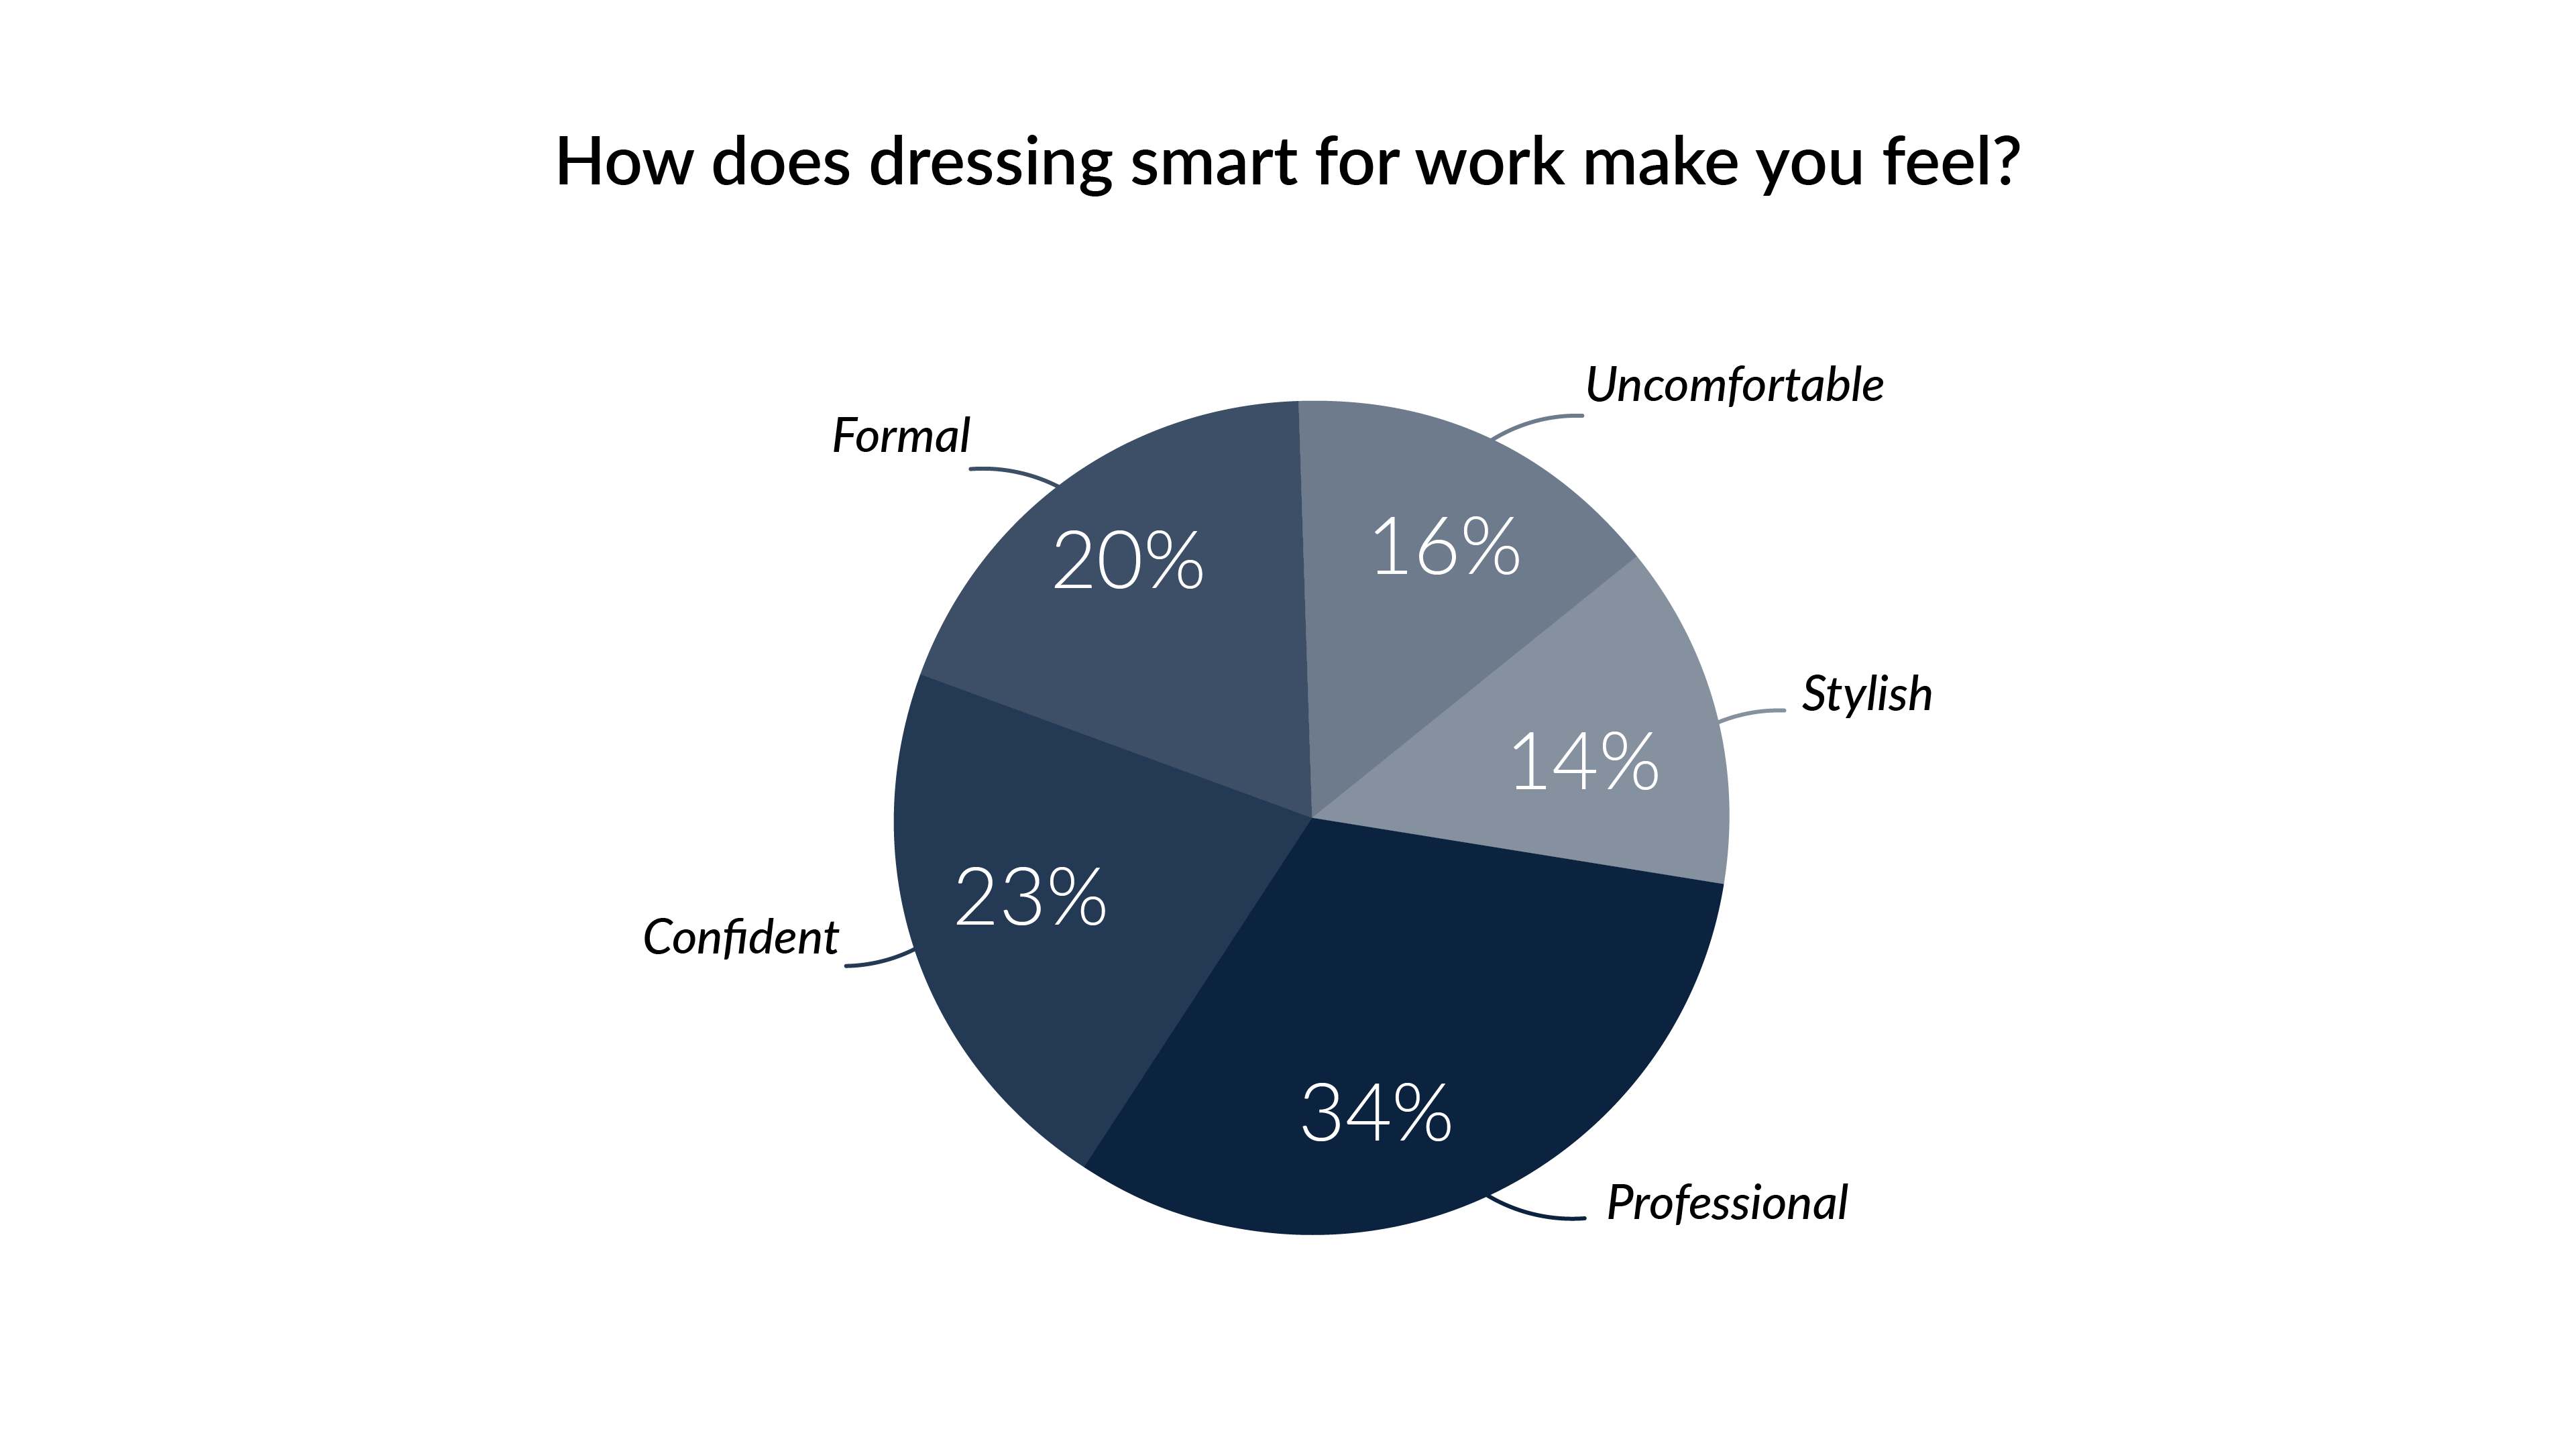 How does dressing smart for work make you feel